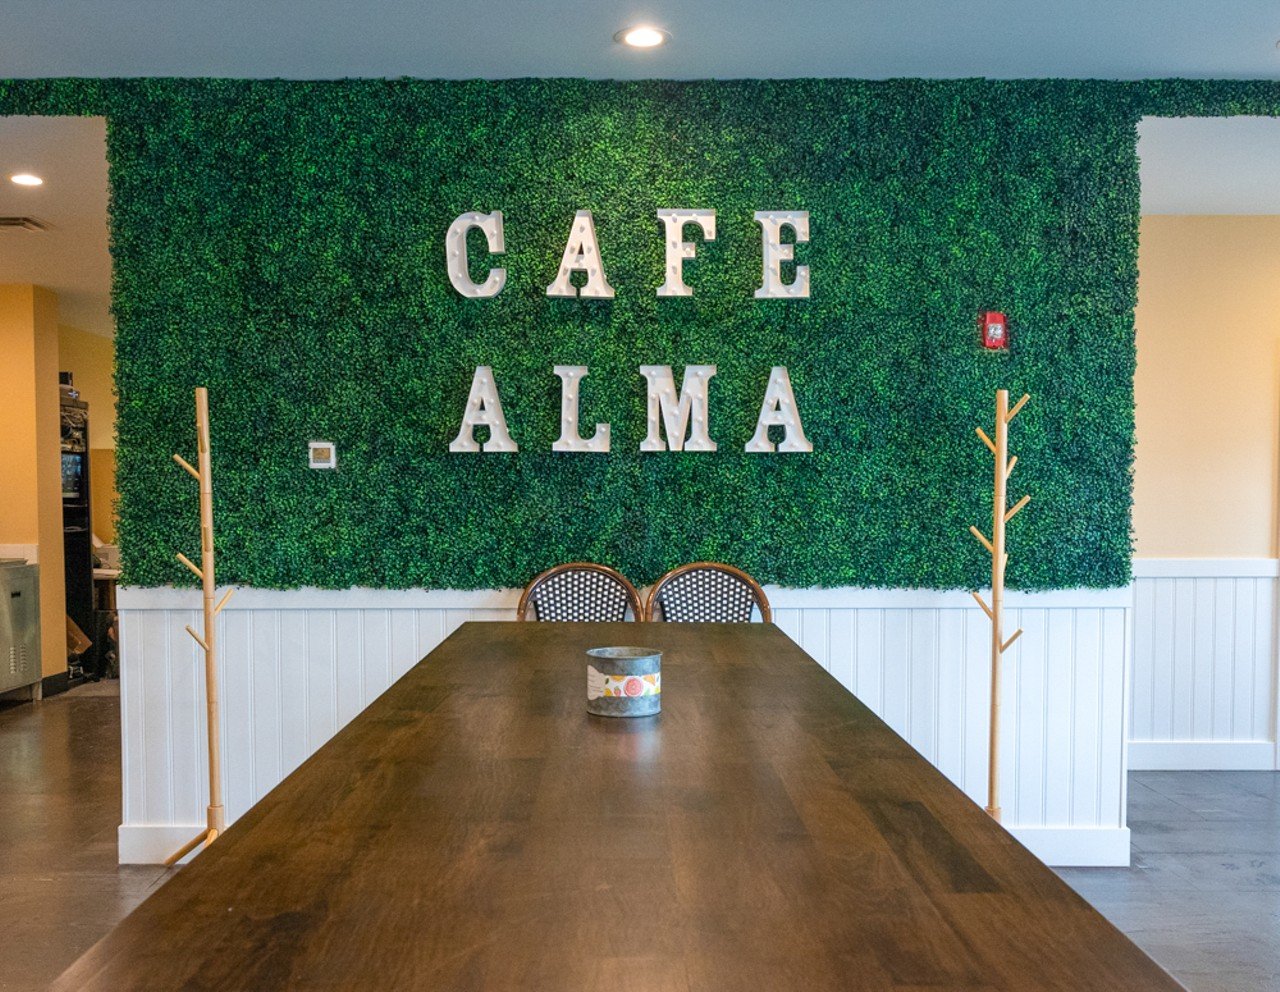 Café Alma
6111 Montgomery Road, Pleasant Ridge
Health-focused Mediterranean restaurant Café Alma recently opened its doors in the former space occupied by Molly Malone's Irish Pub in Pleasant Ridge. The cafe creates delicious but healthy dishes by using high-quality ingredients packed with good flavors. Breakfast offers everything from a build-your-own omelet to four different options of the Middle Eastern breakfast favorite shakshuka. Heading into lunch, they have salad and sandwiches all packed with fresh ingredients. Café Alma also offers a full bar that features items like the Eddie Colada and the Molly Malone, an homage to the building's previous occupants made with coffee, Irish whiskey, cane sugar and topped with whipped cream. If you're looking for something non-alcoholic, grab one of the cafe's many imaginative coffees like their creamy Nutella latte.